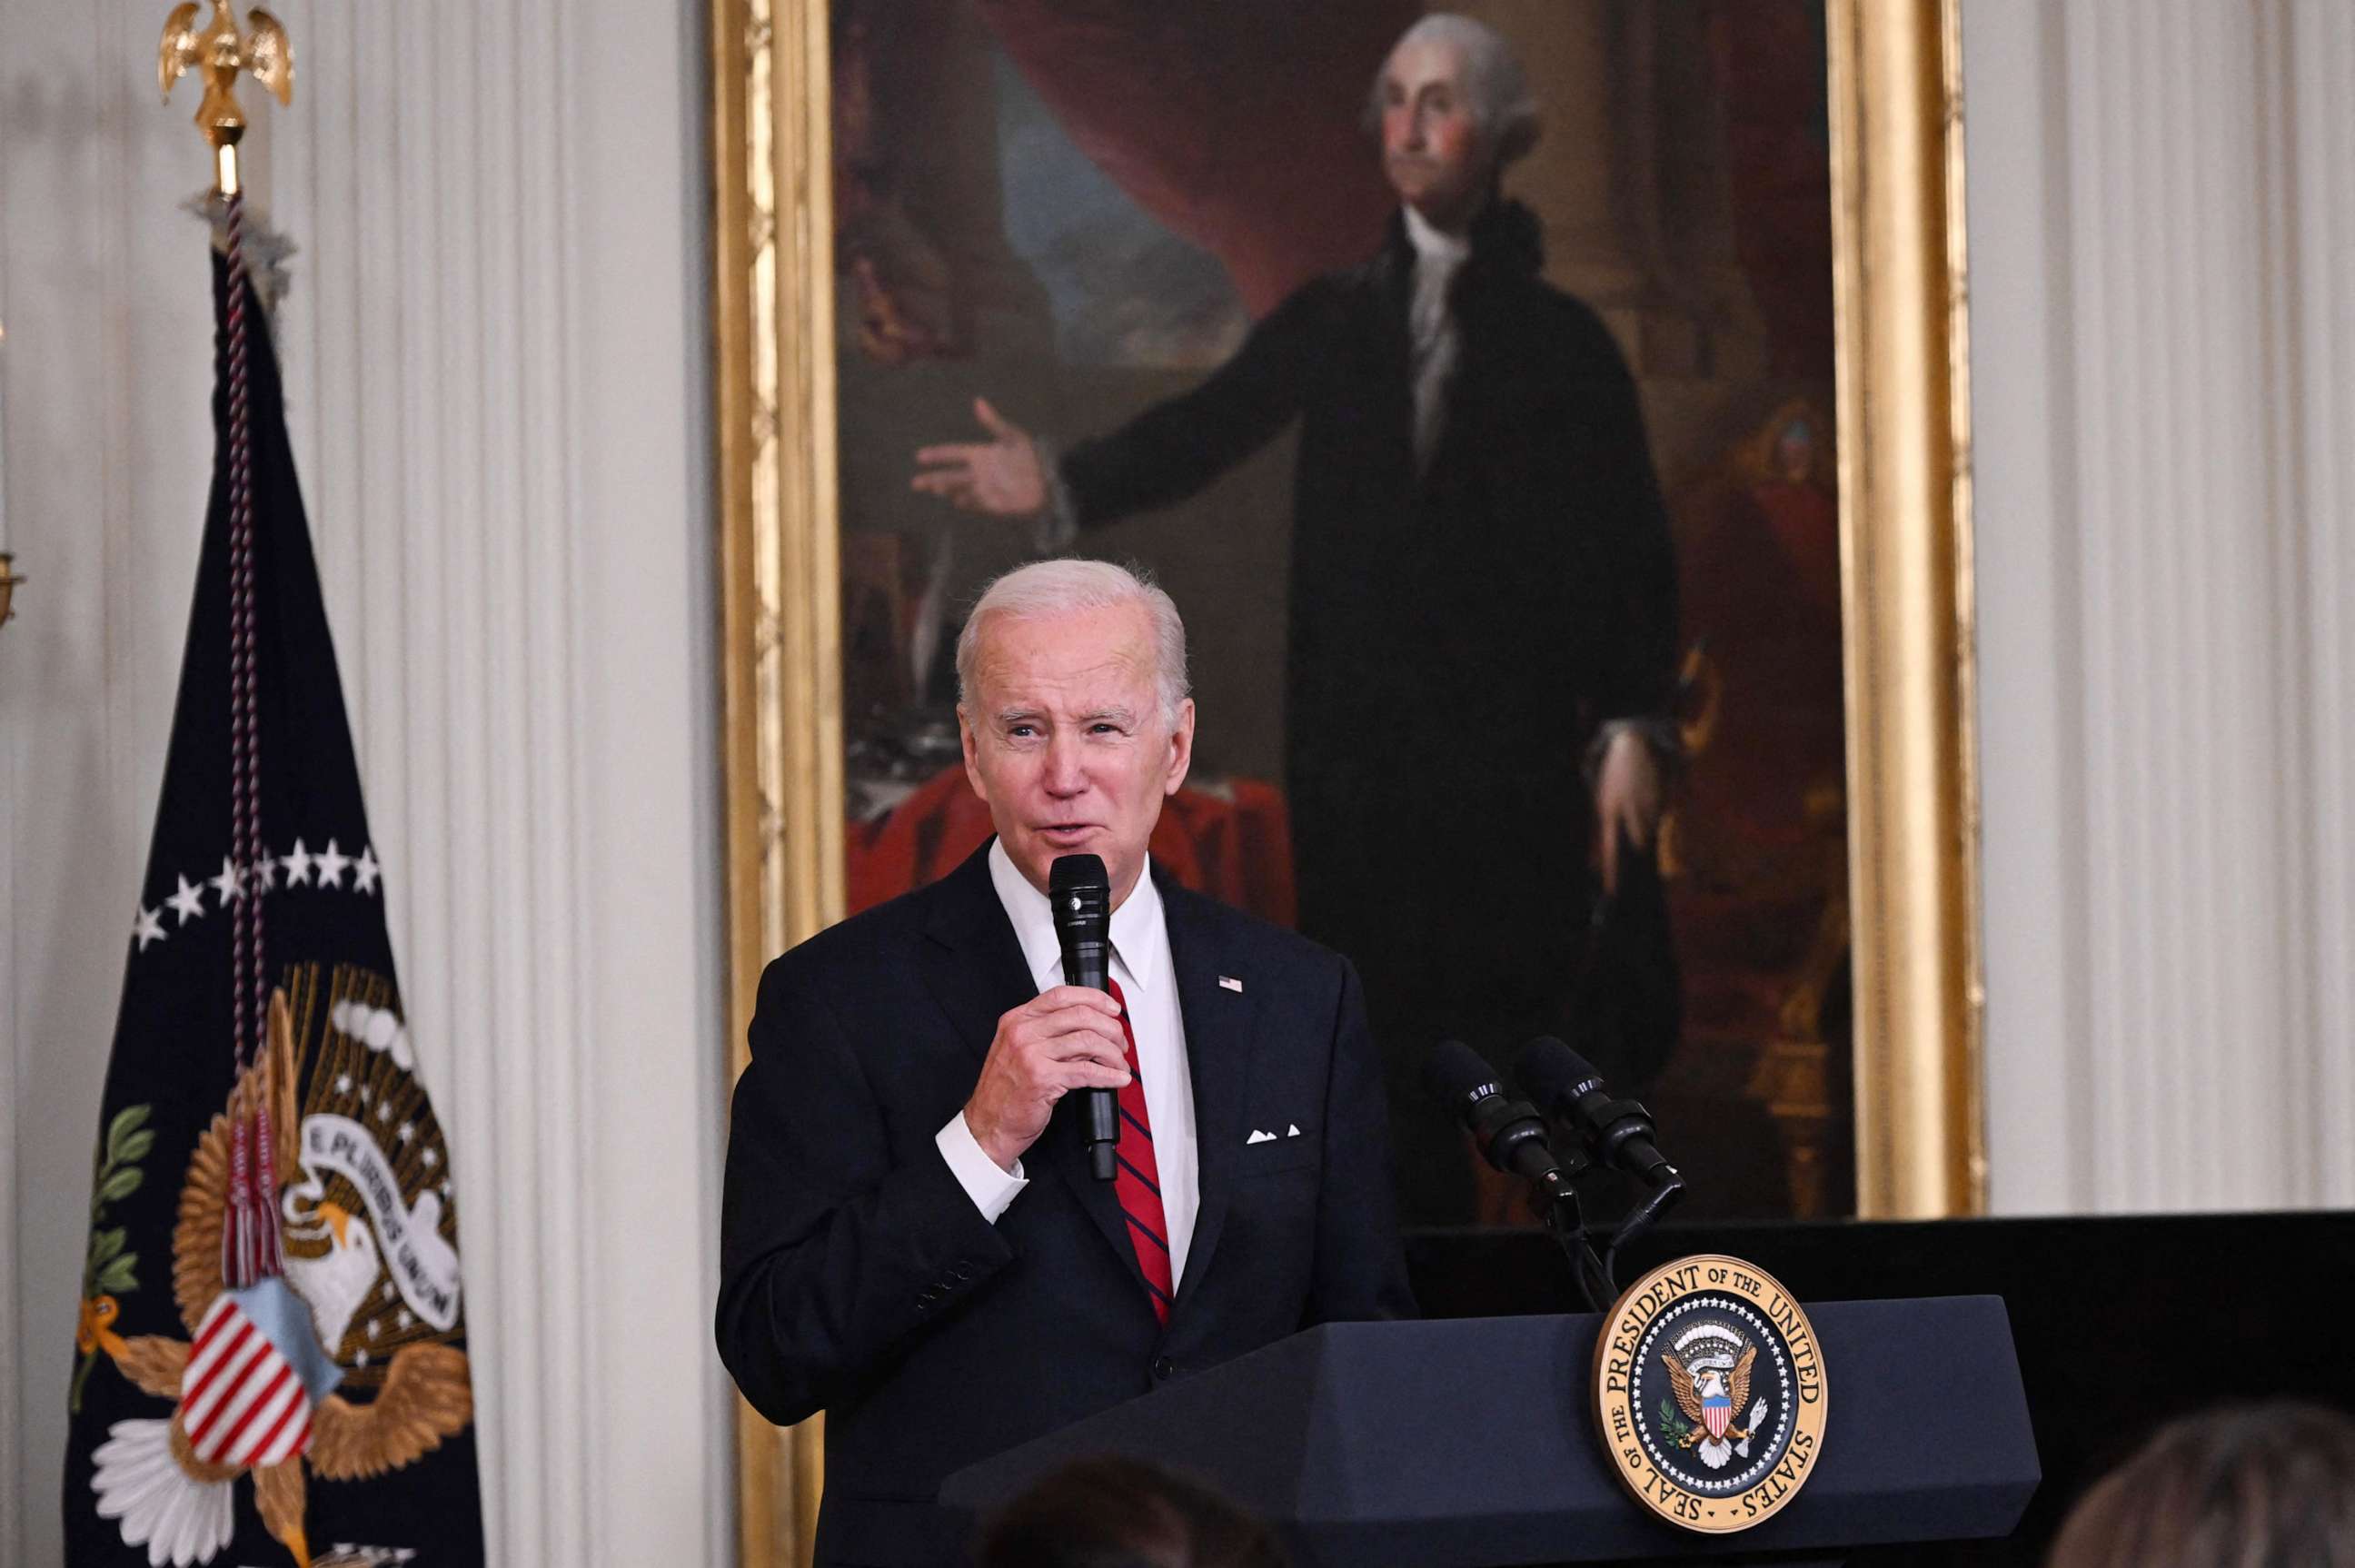 PHOTO: President Joe Biden speaks during a reception to celebrate the Lunar New Year, in the East Room of the White House in Washington on Jan. 26, 2023.